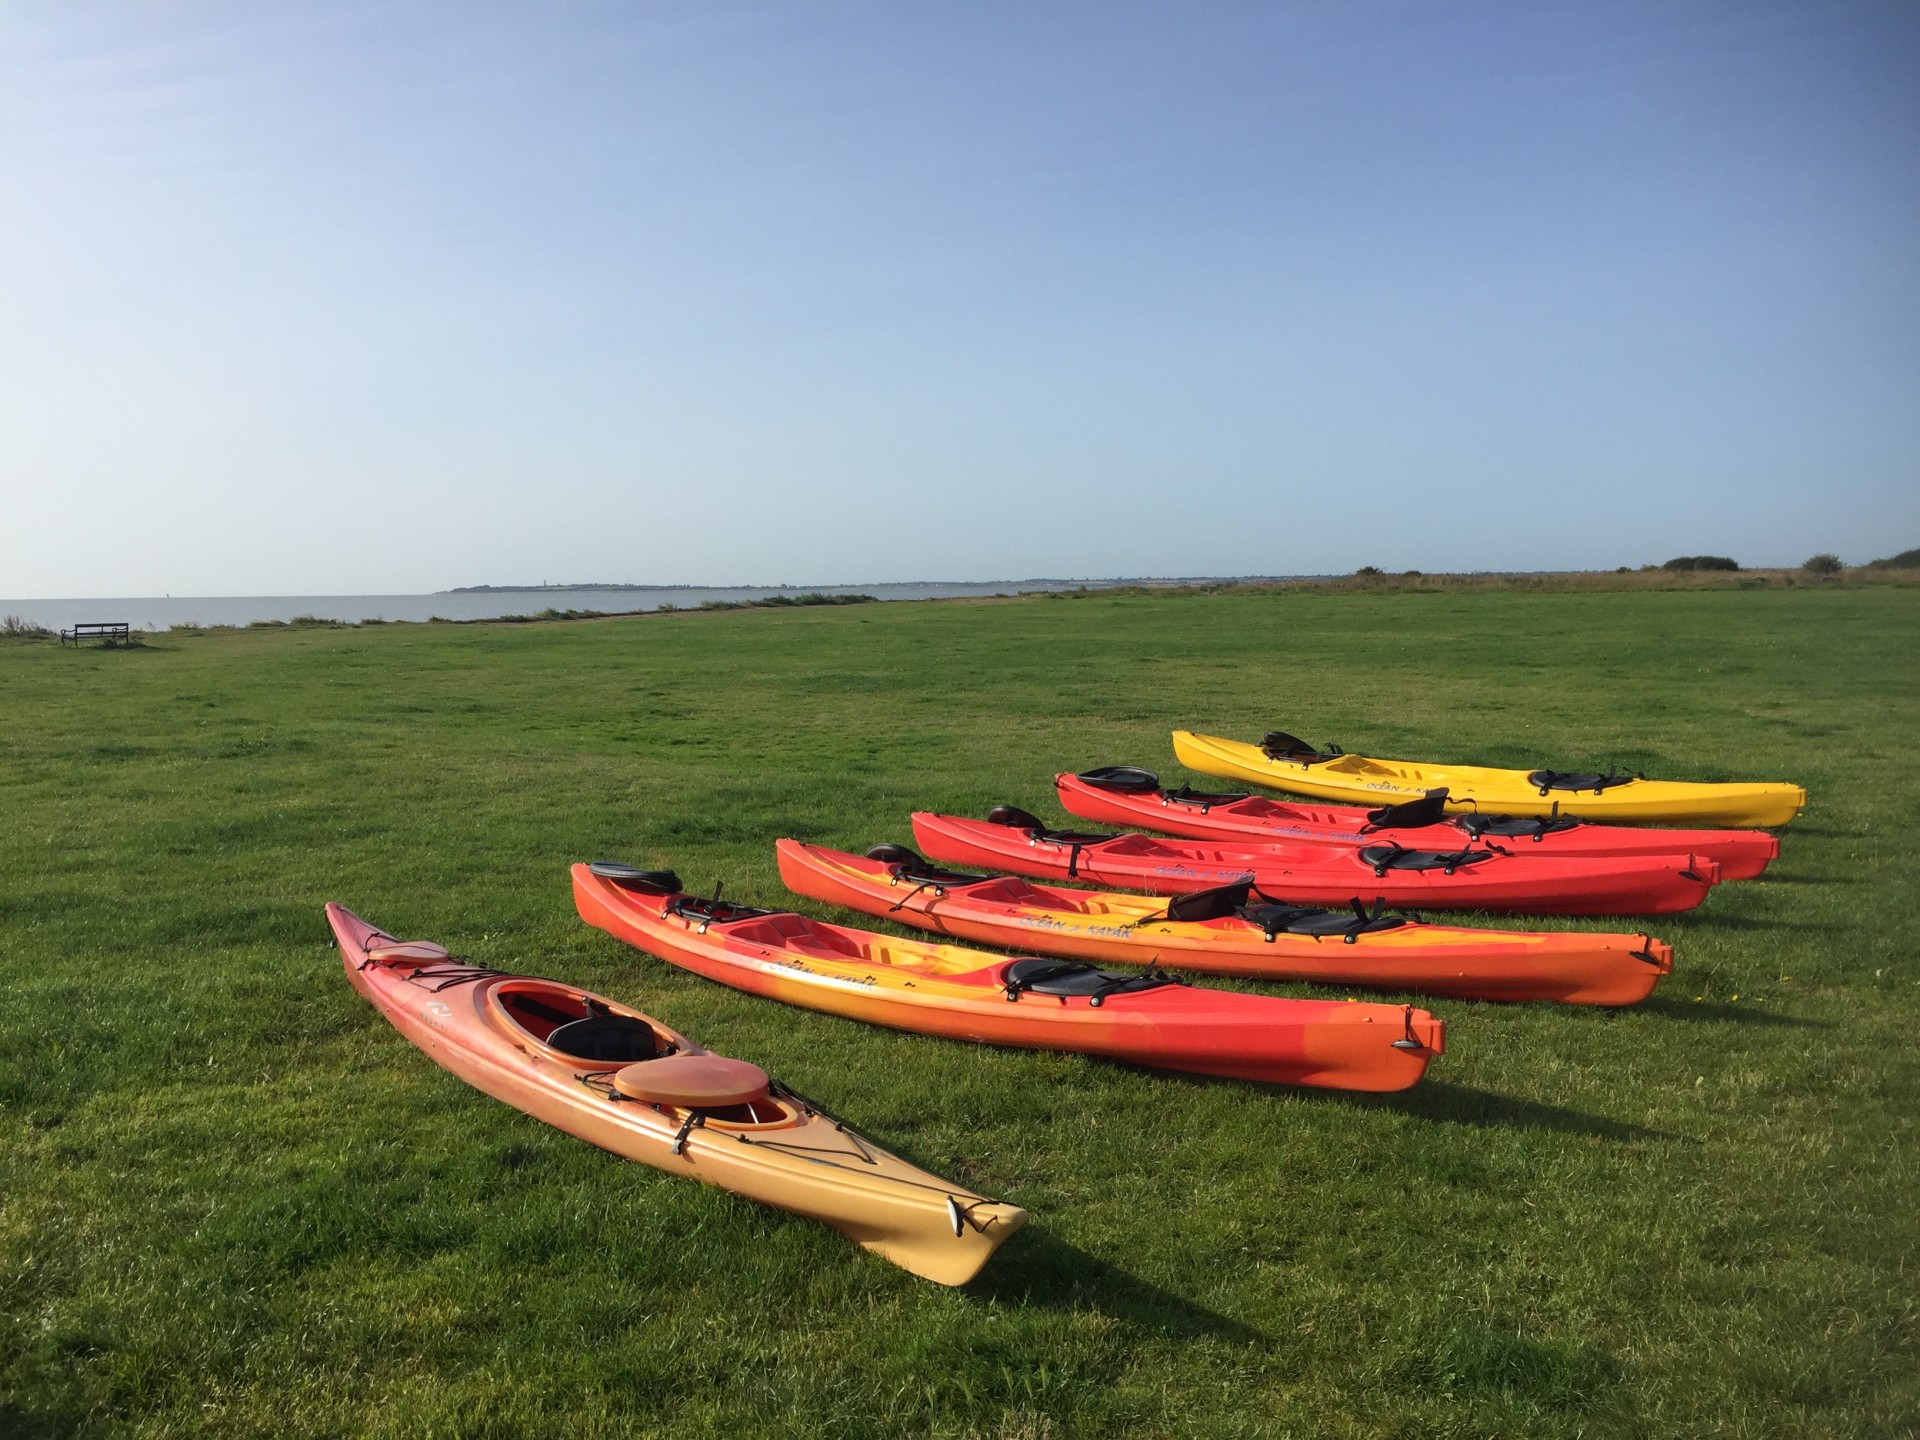 Sea kayaks laid neatly on grass awaiting launch in Essex.